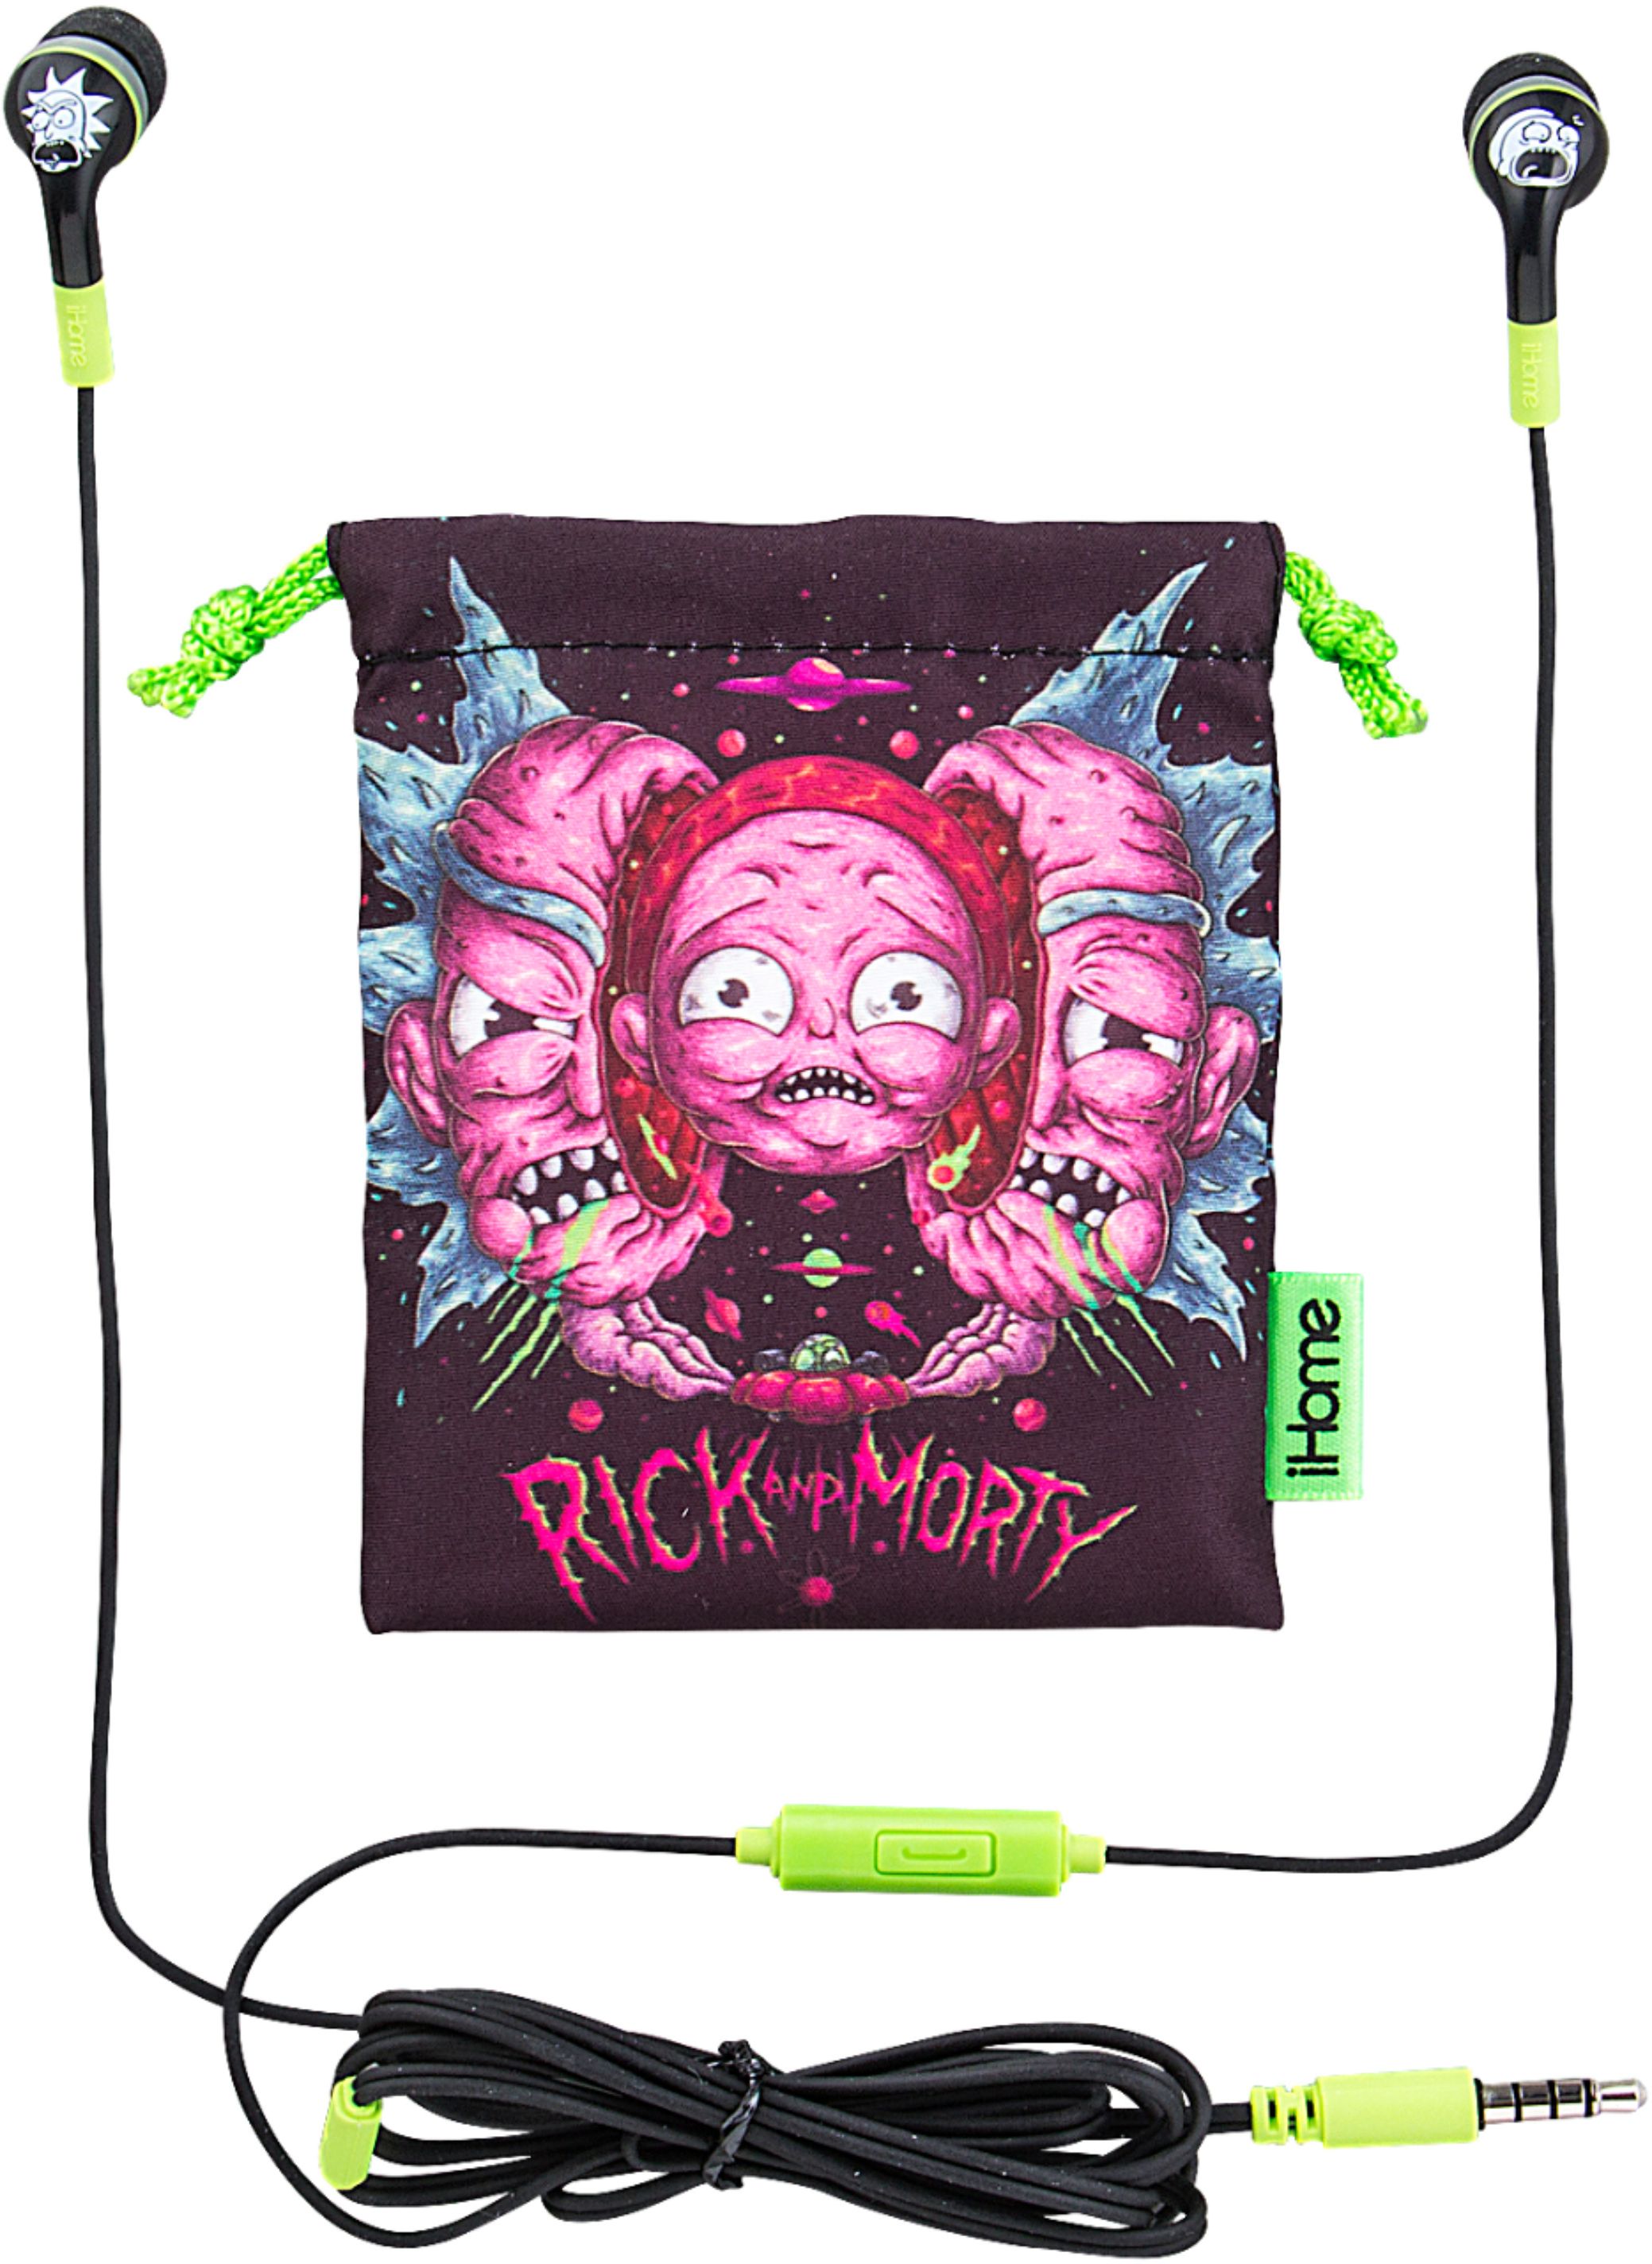 Best Buy: iHome Rick and Morty Wired Headphones Green/Black CI-M15RM.FXV8